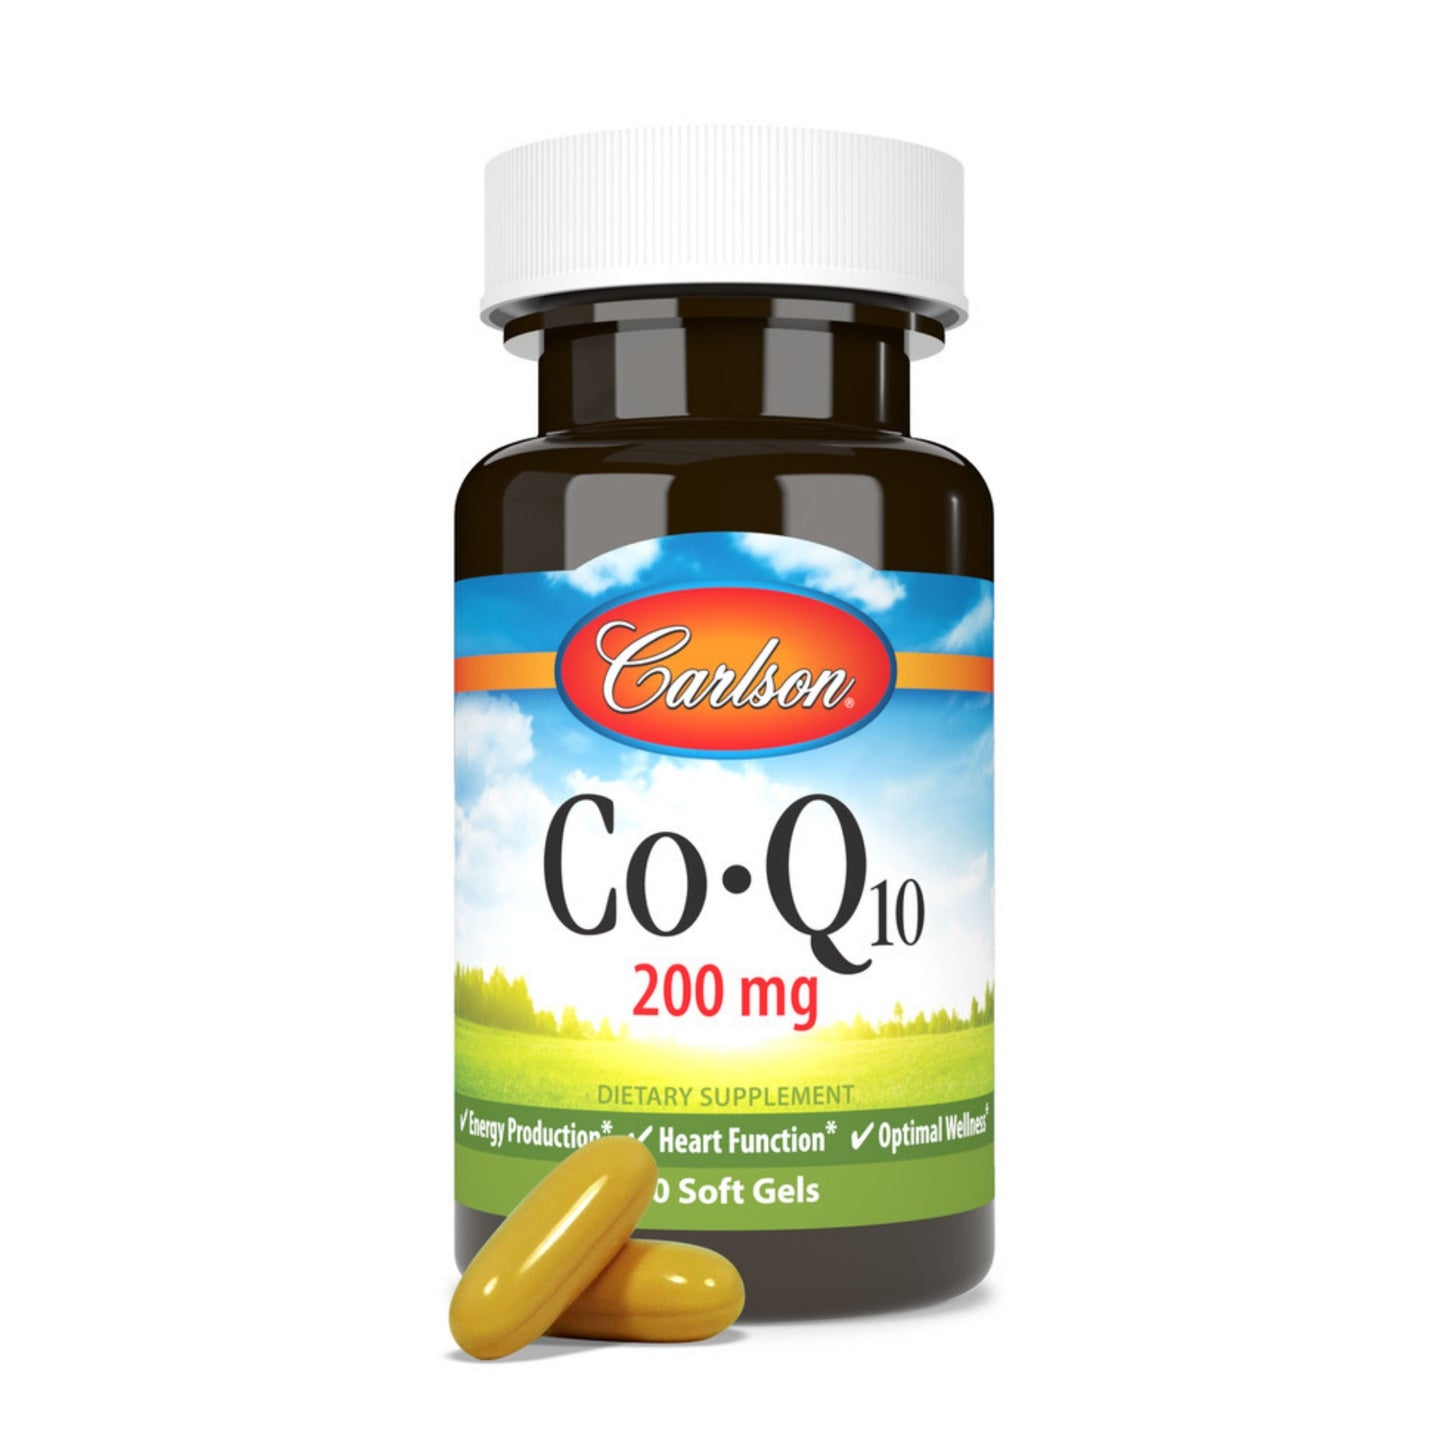 Carlson Labs CoQ10 Energy Production Heart Function Optimal Wellness Gluten-Free 200mg 30softgels